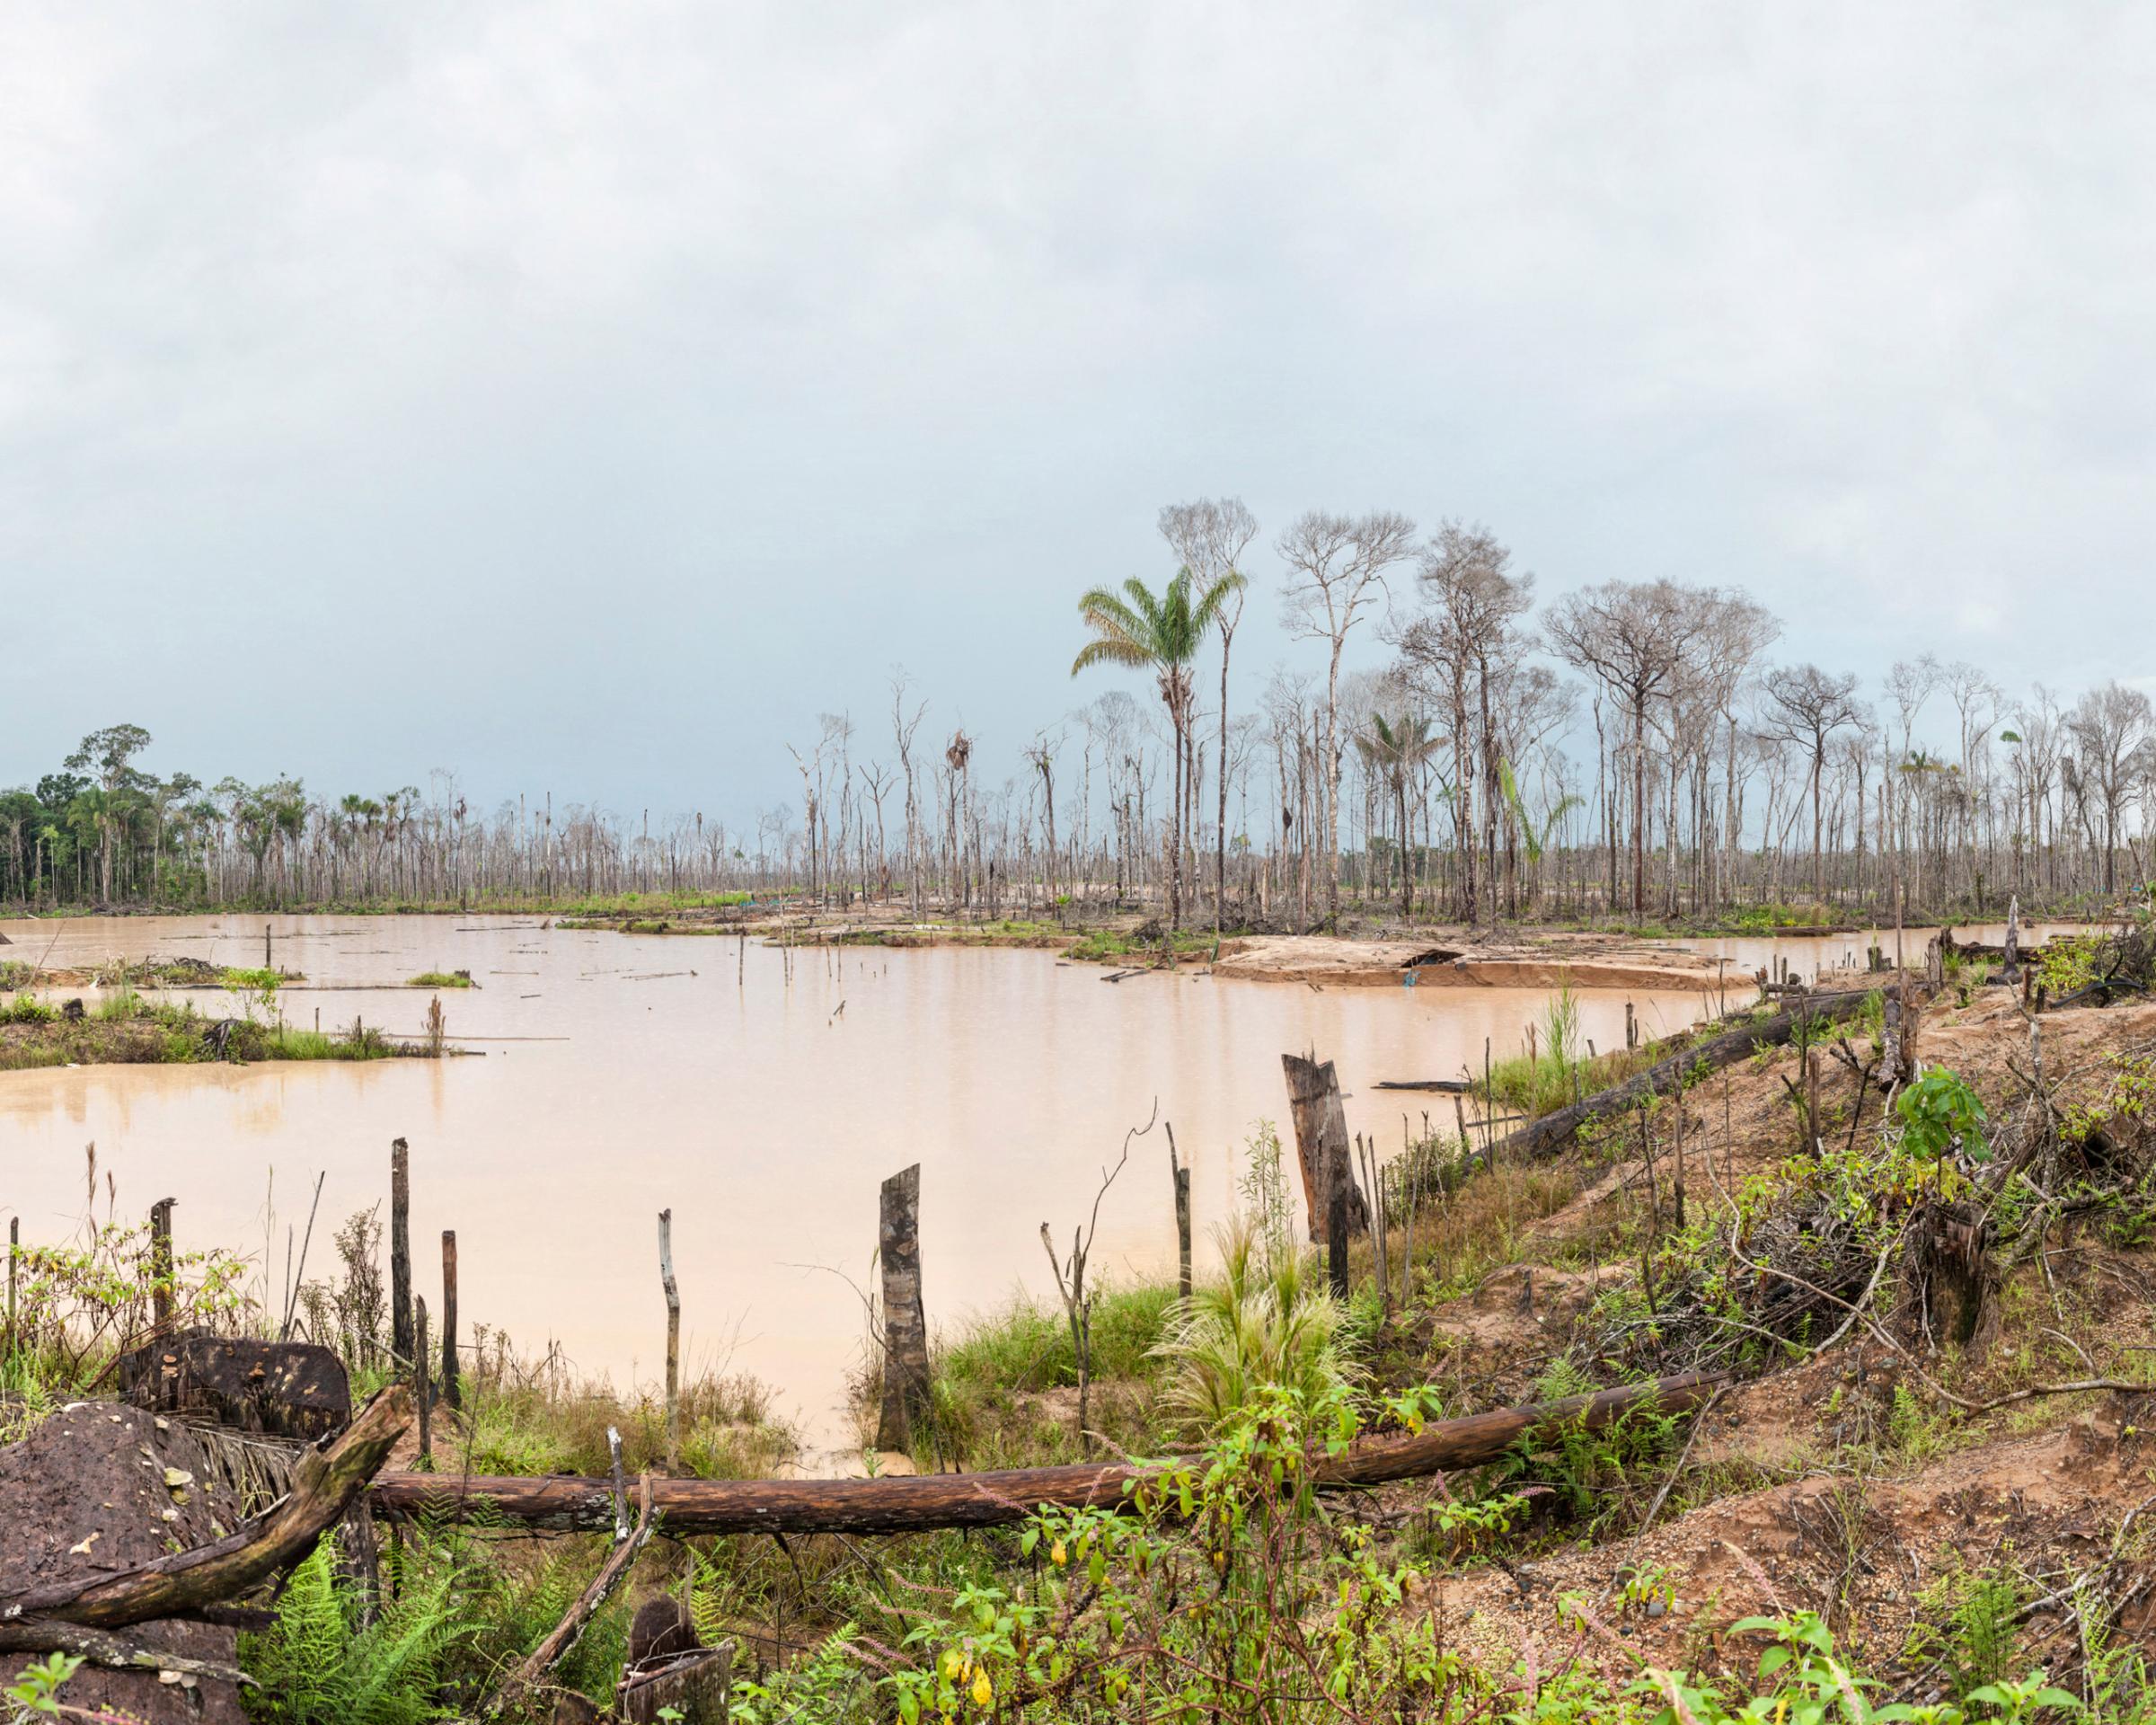 Illegal mining in Madre de Dios, Peru, is devastating the jungle and natural environment.